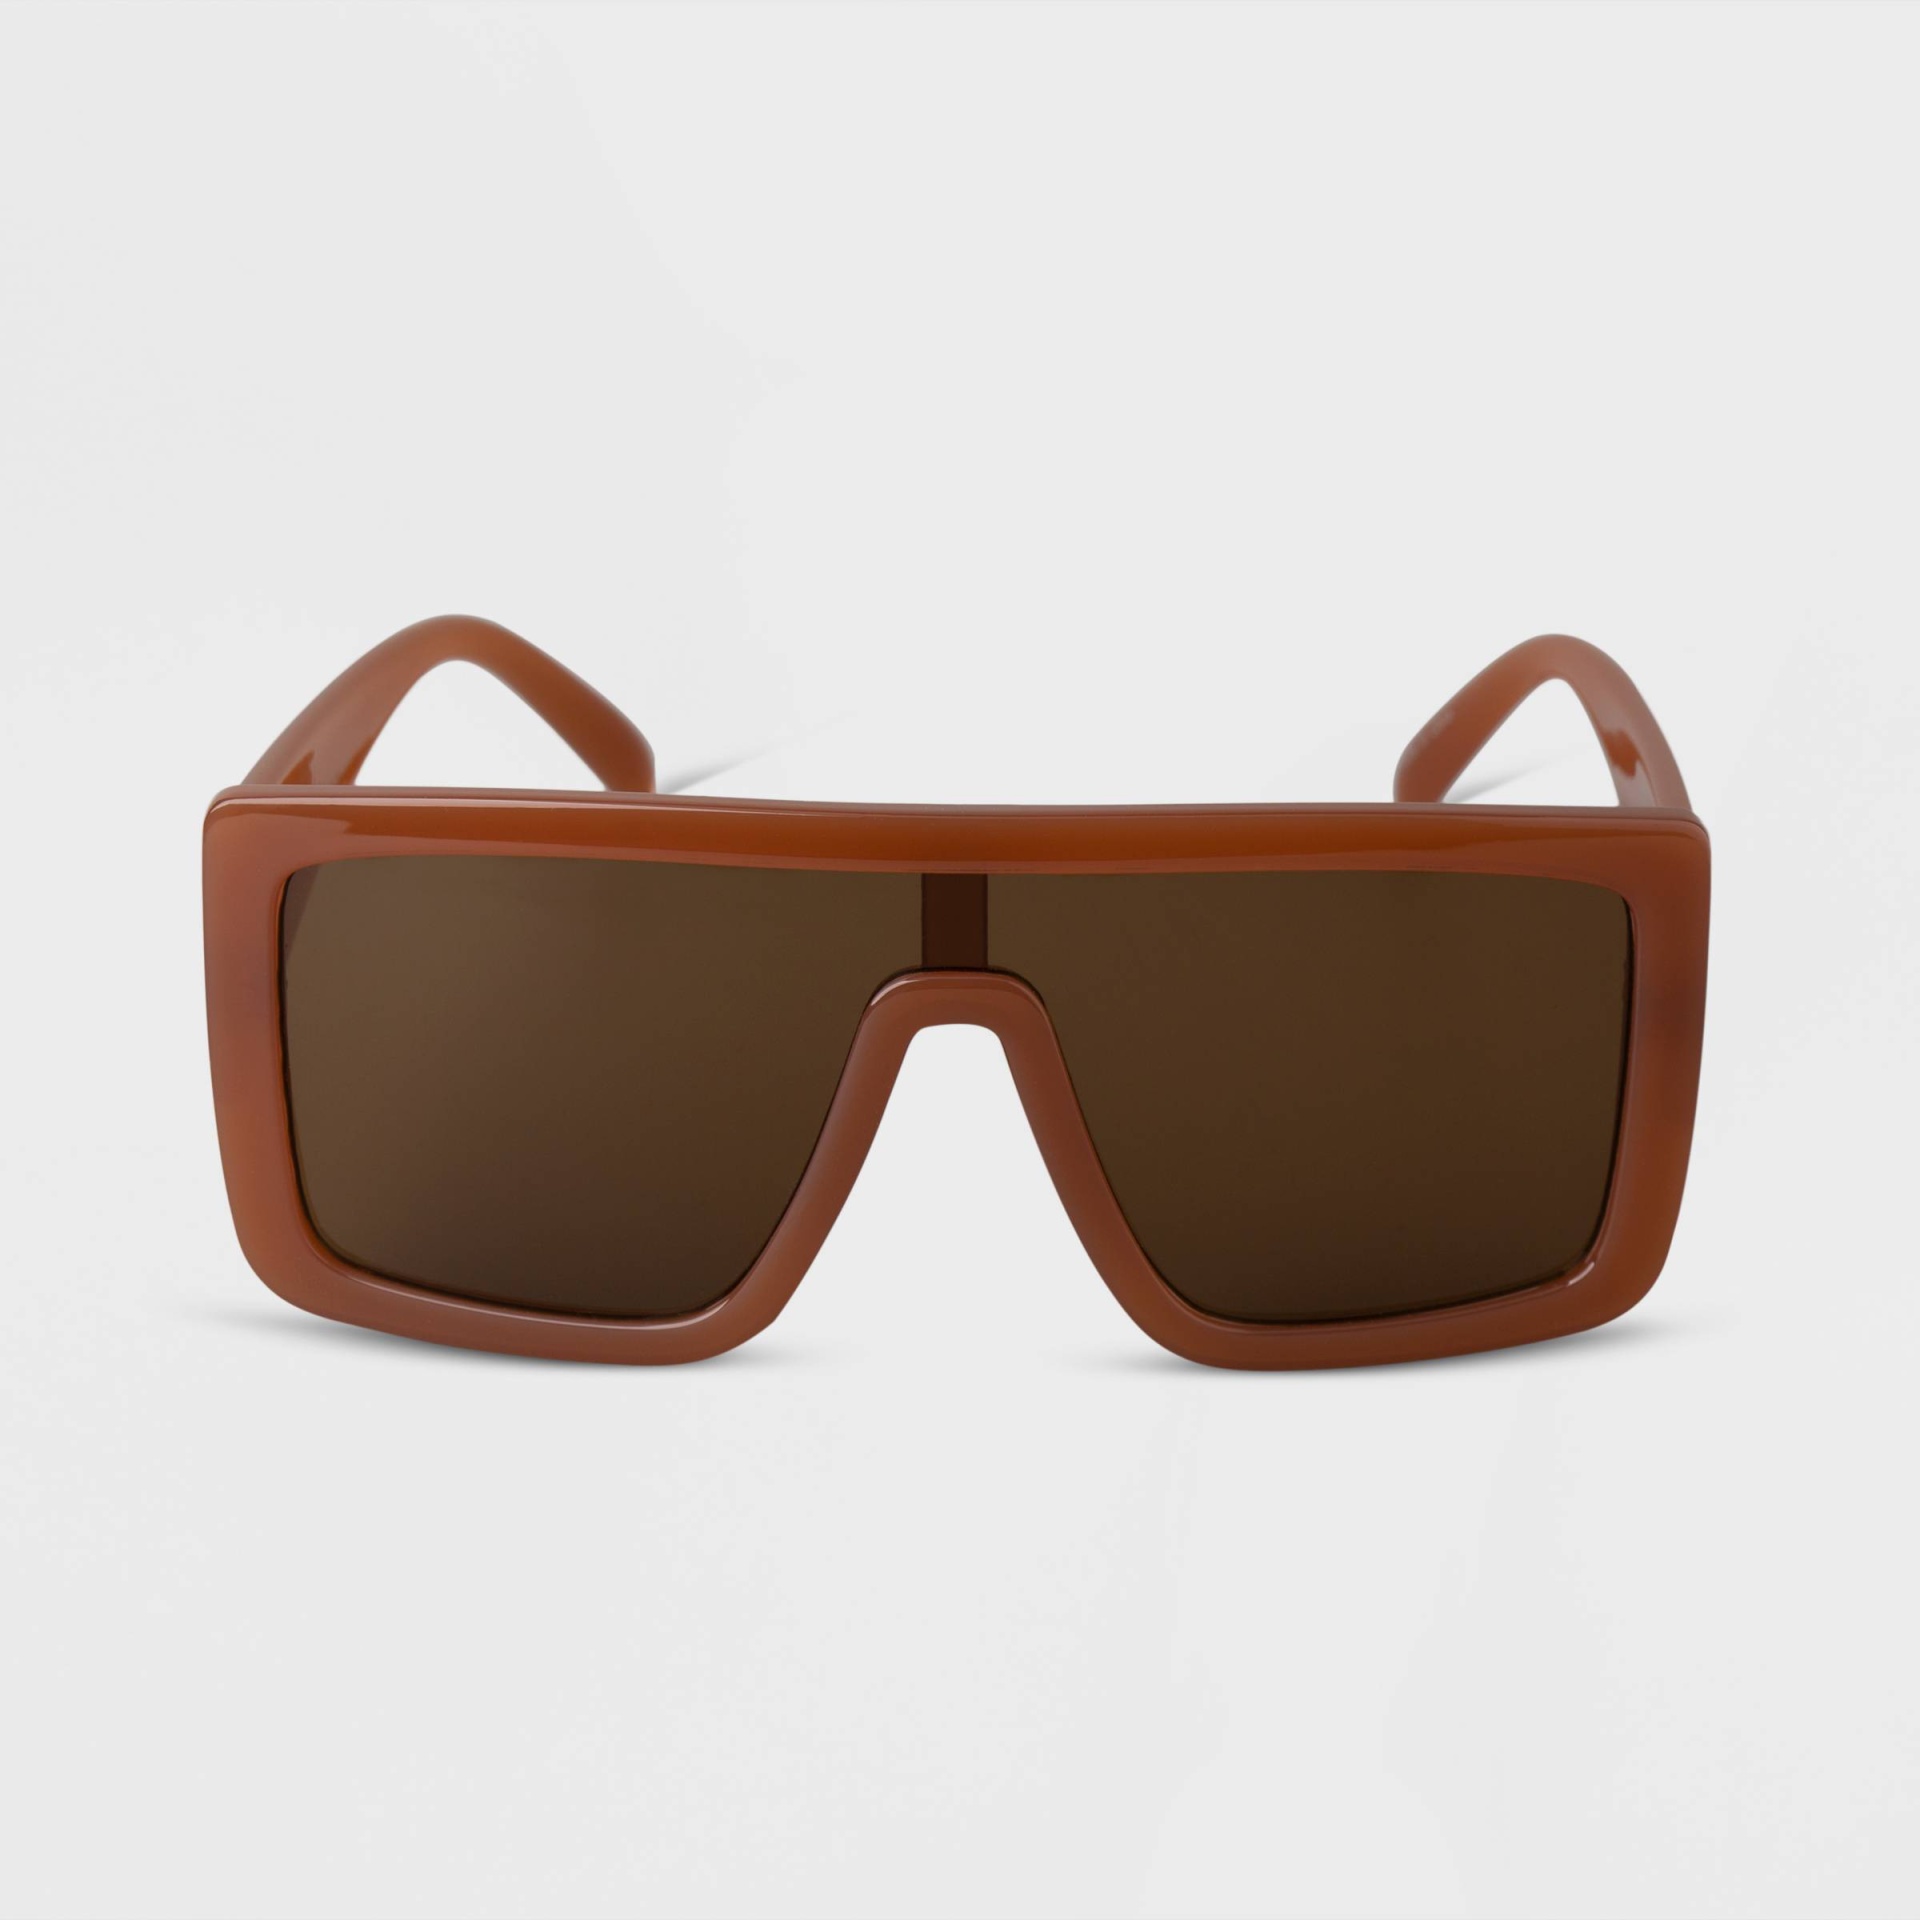 slide 1 of 2, Women's Oversized Shield Sunglasses - A New Day Brown, 1 ct